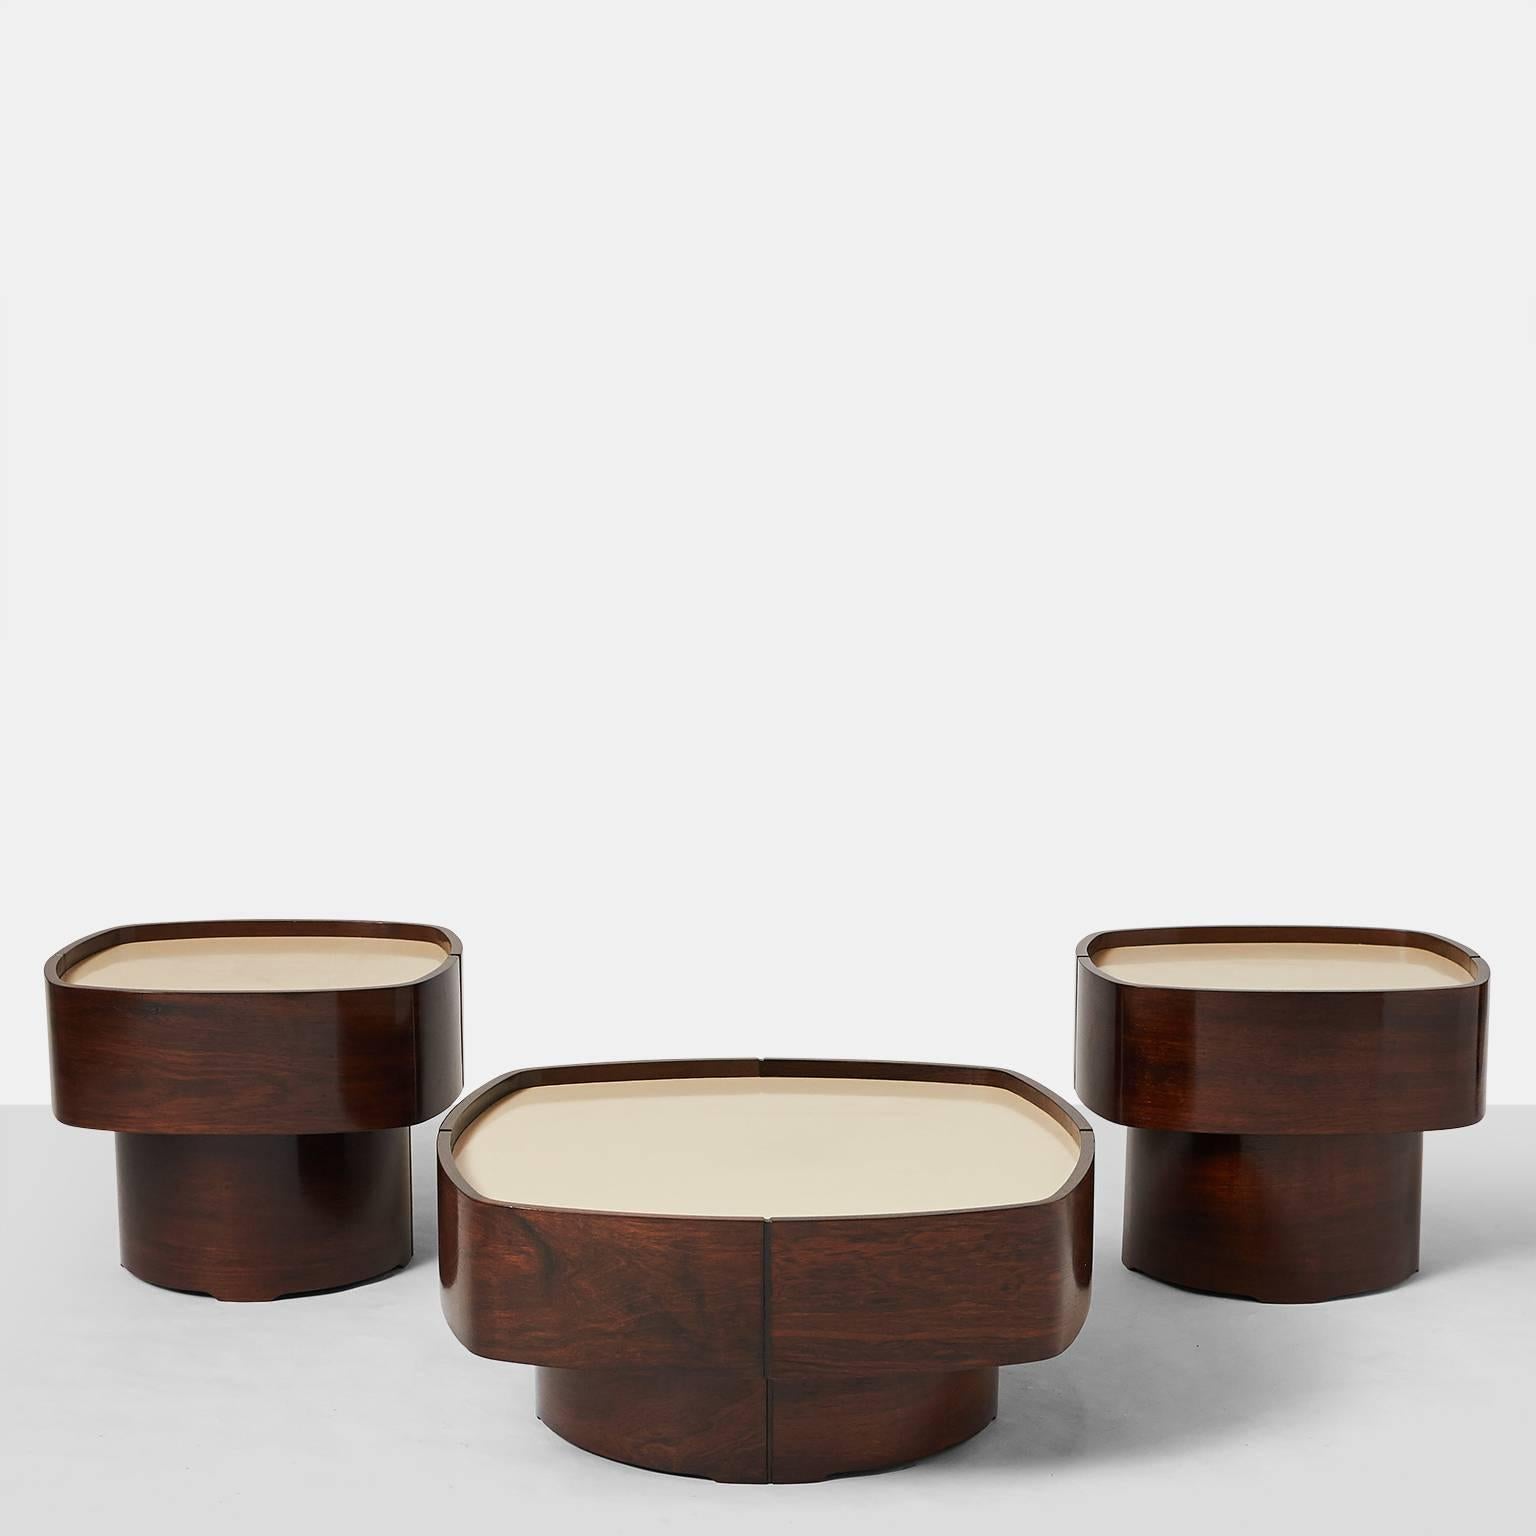 A suite of two side tables and one coffee table by Jorge Zalszupin for L' Atelier. The soft sideed tables are in a hardwood with almond color laminate top.
The side tables measure 20 x 17.5 x 17.5